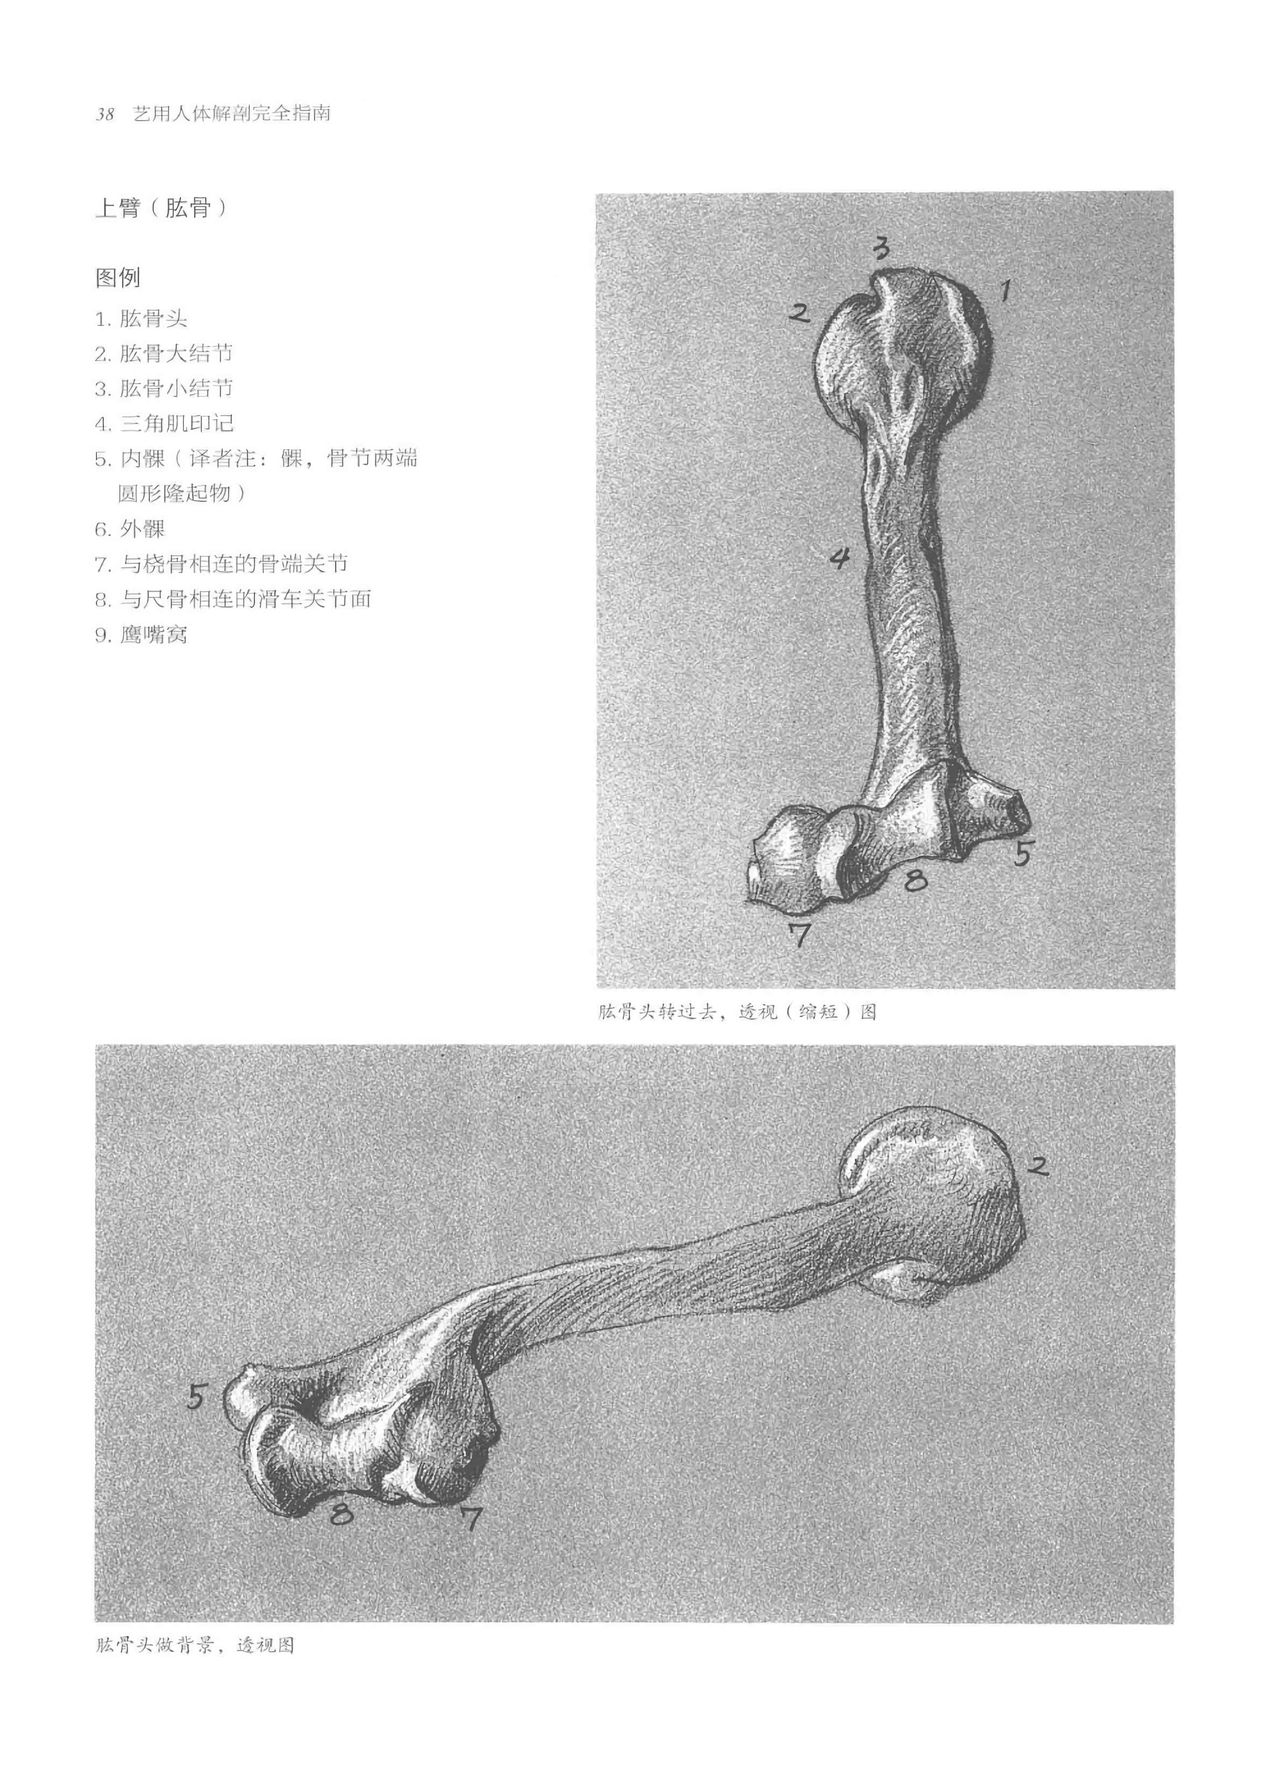 Anatomy-A Complete Guide for Artists - Joseph Sheppard [Chinese] 38